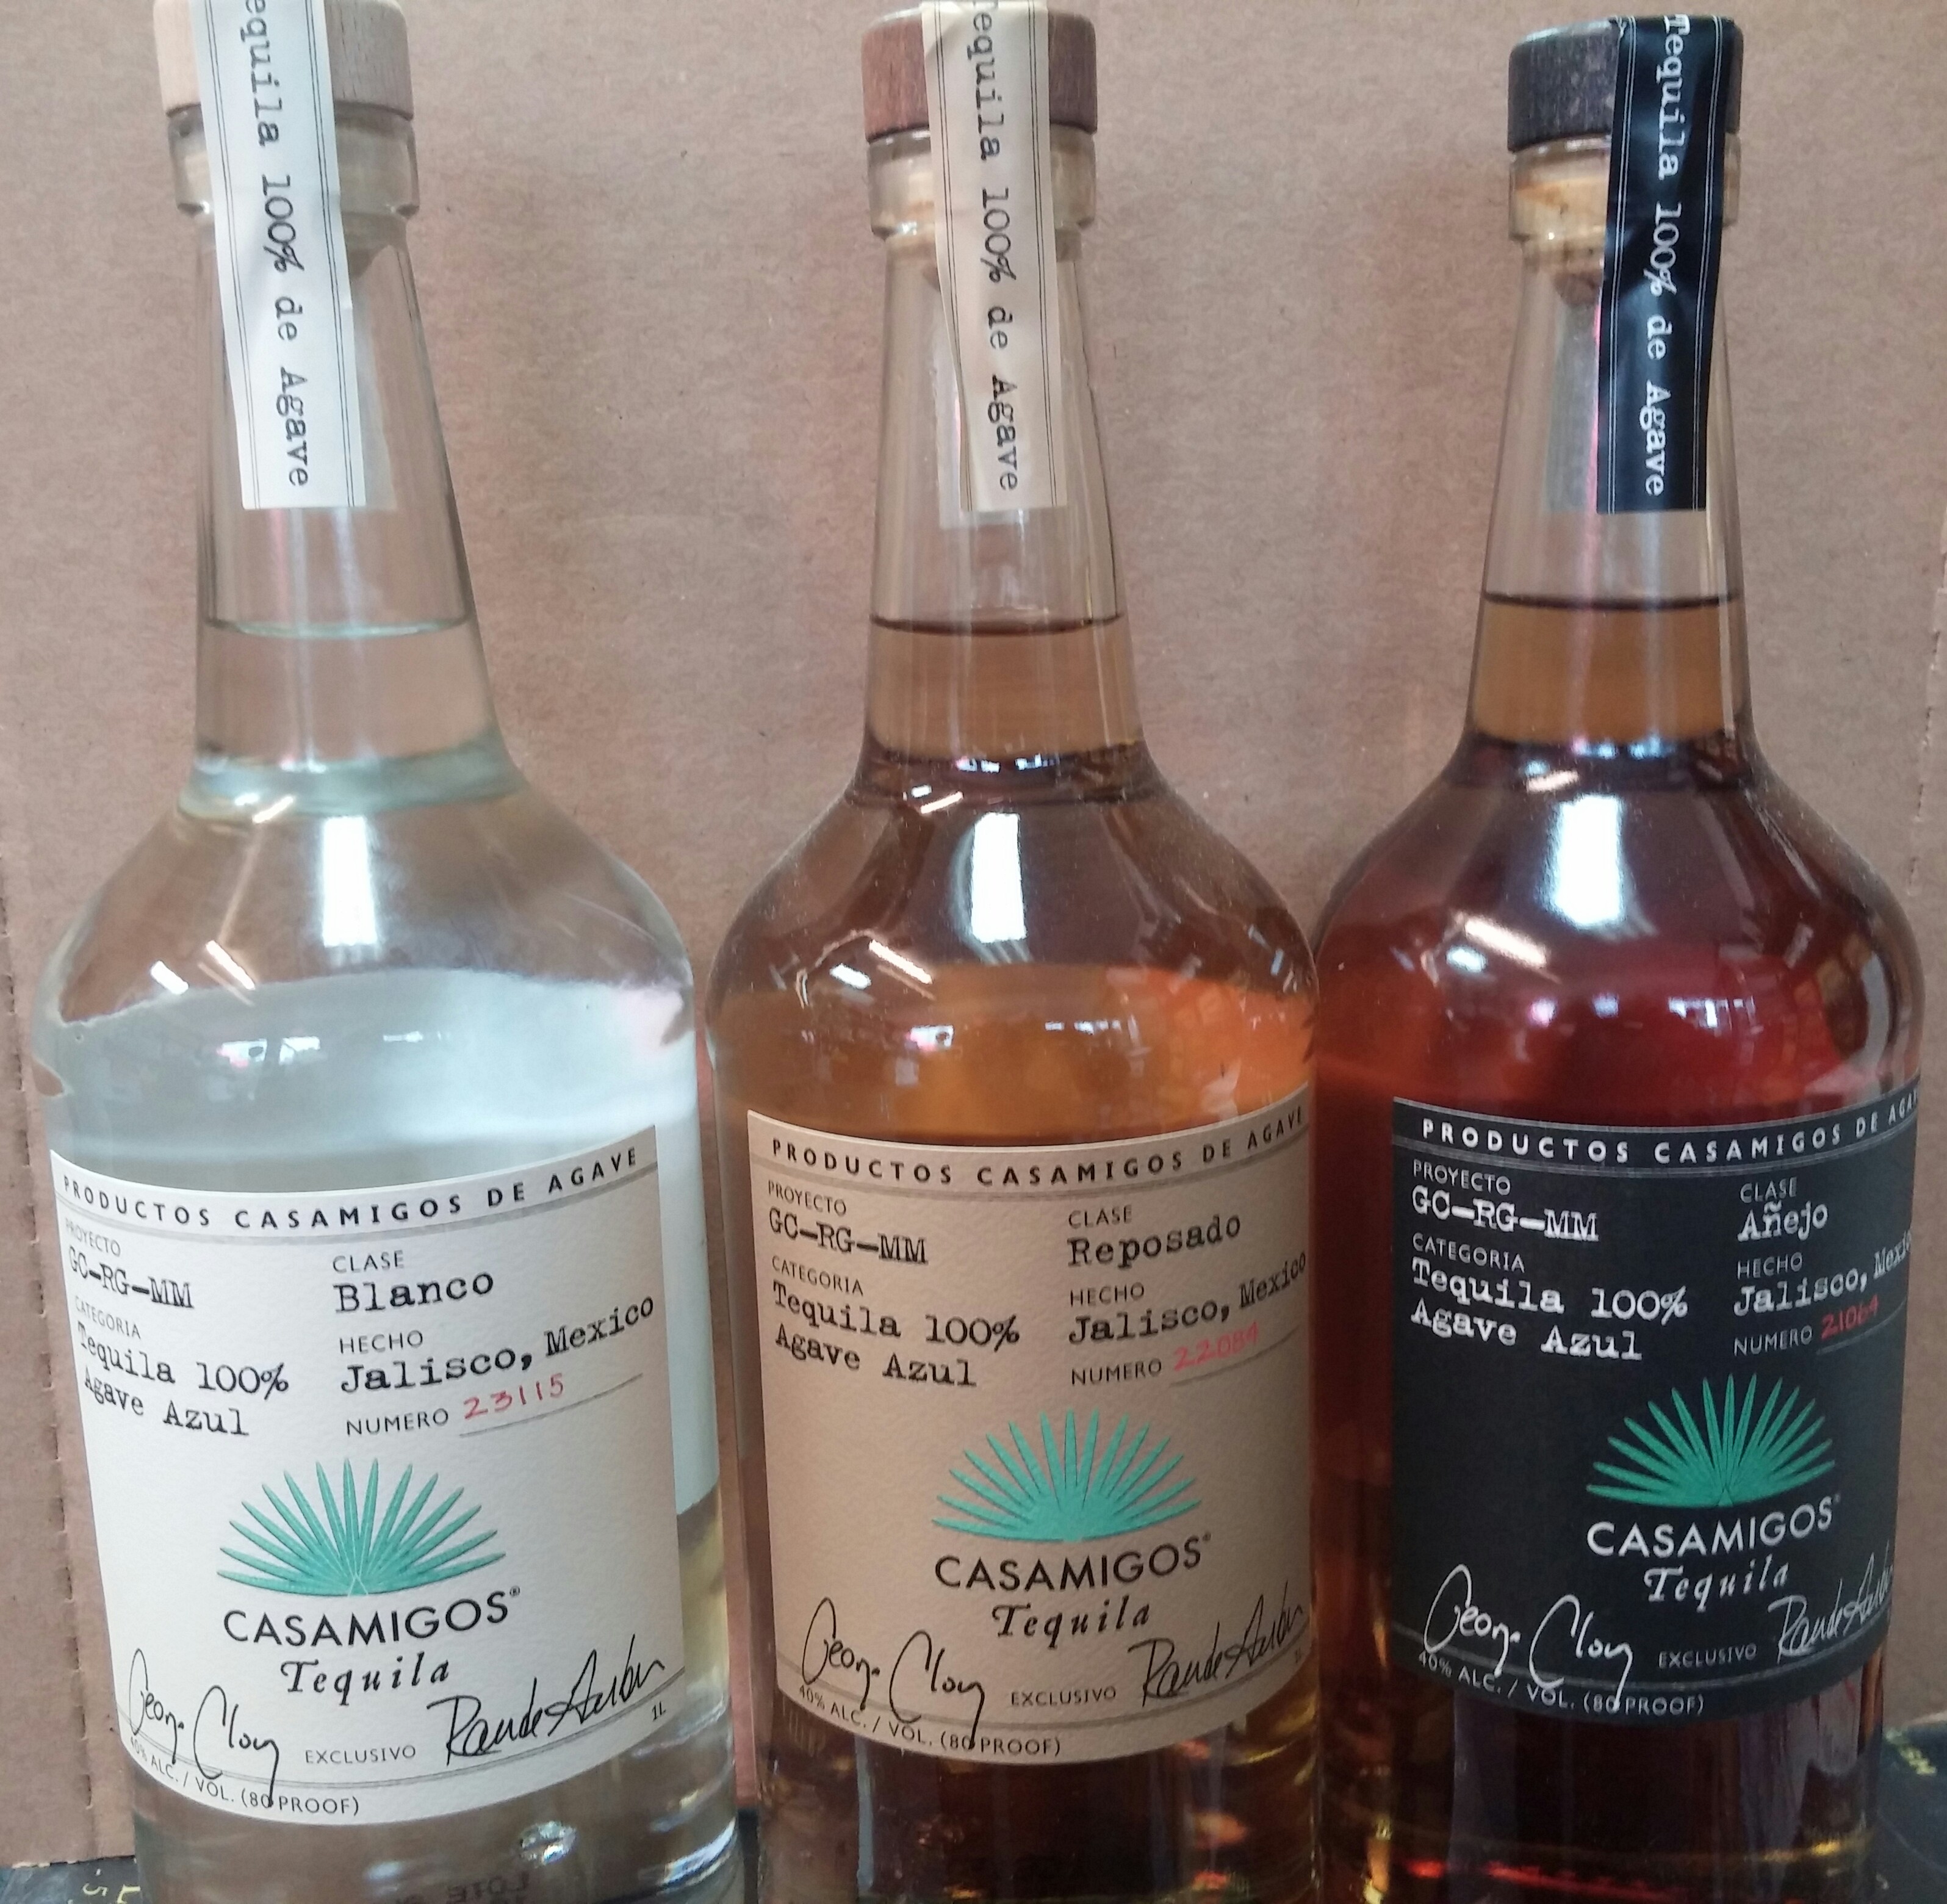 0 Result Images of Casamigos Blanco Bottle Sizes - PNG Image Collection